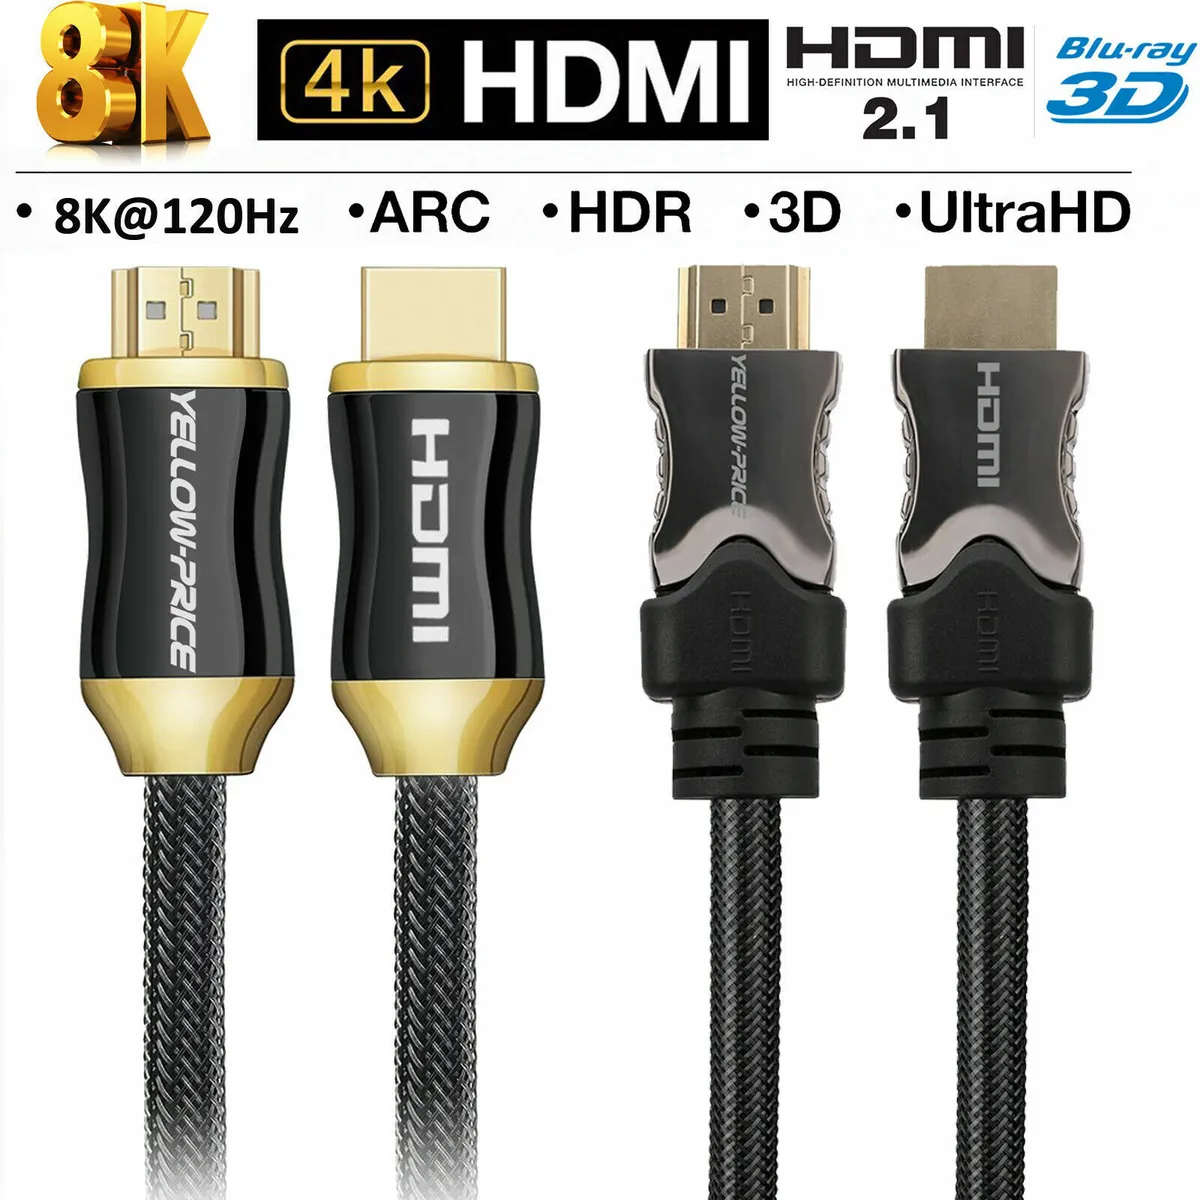 Buy Wholesale China Hdmi Splitter 1 In 2 Out, Hdmi Cable 1080p Male To Dual  Hdmi Female 1 To 2 Channels Hdmi Splitter Adapter For Hdmi Hd, Led, Lcd, &  Hdmi Cable